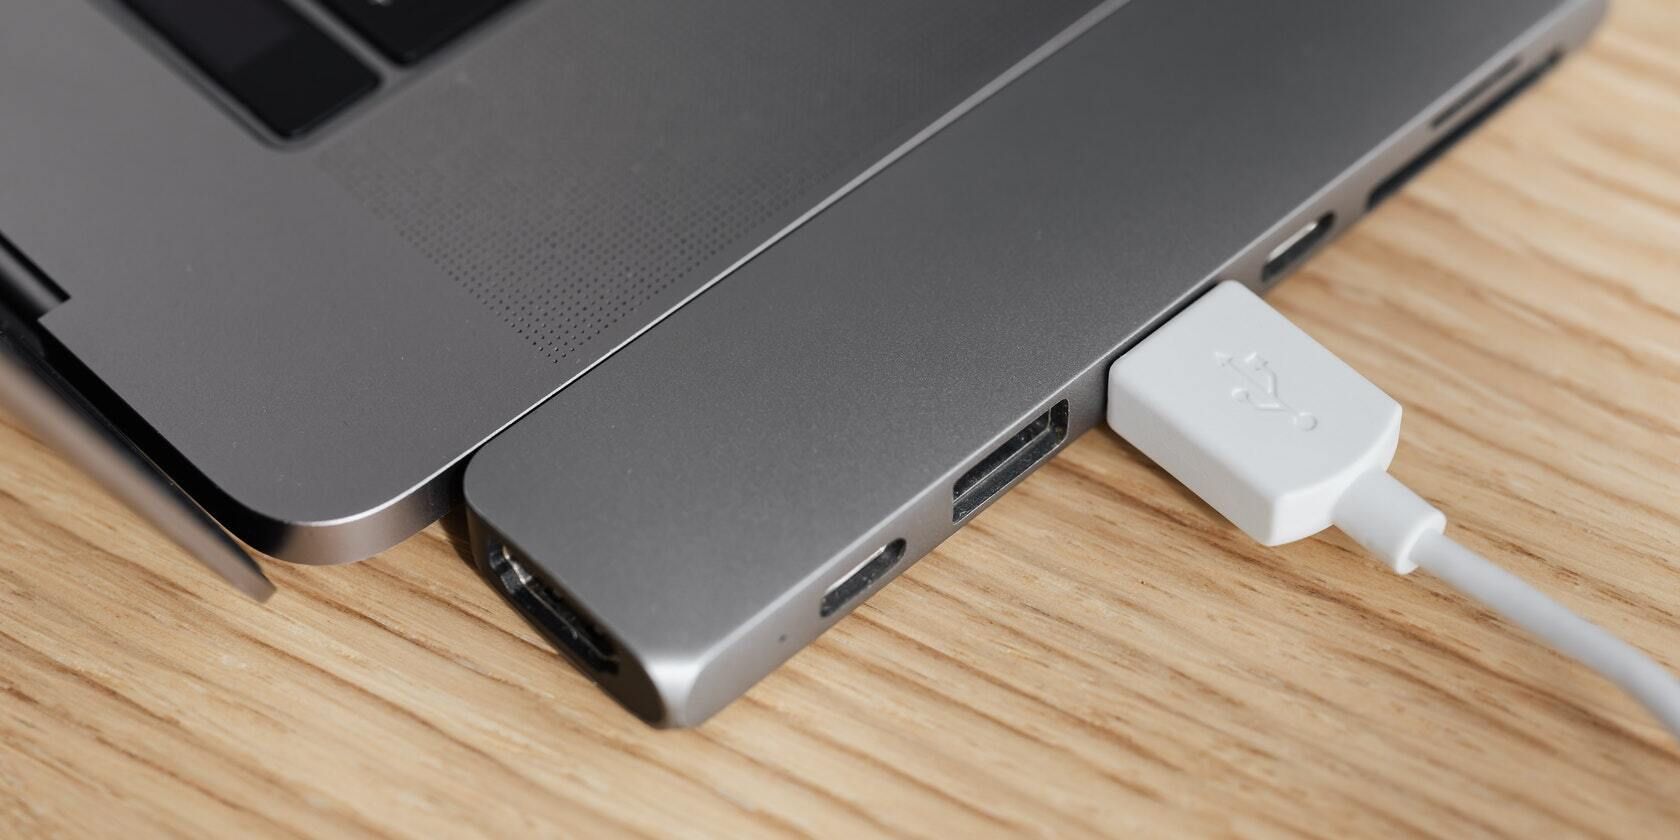 USB dock connected to a MacBook